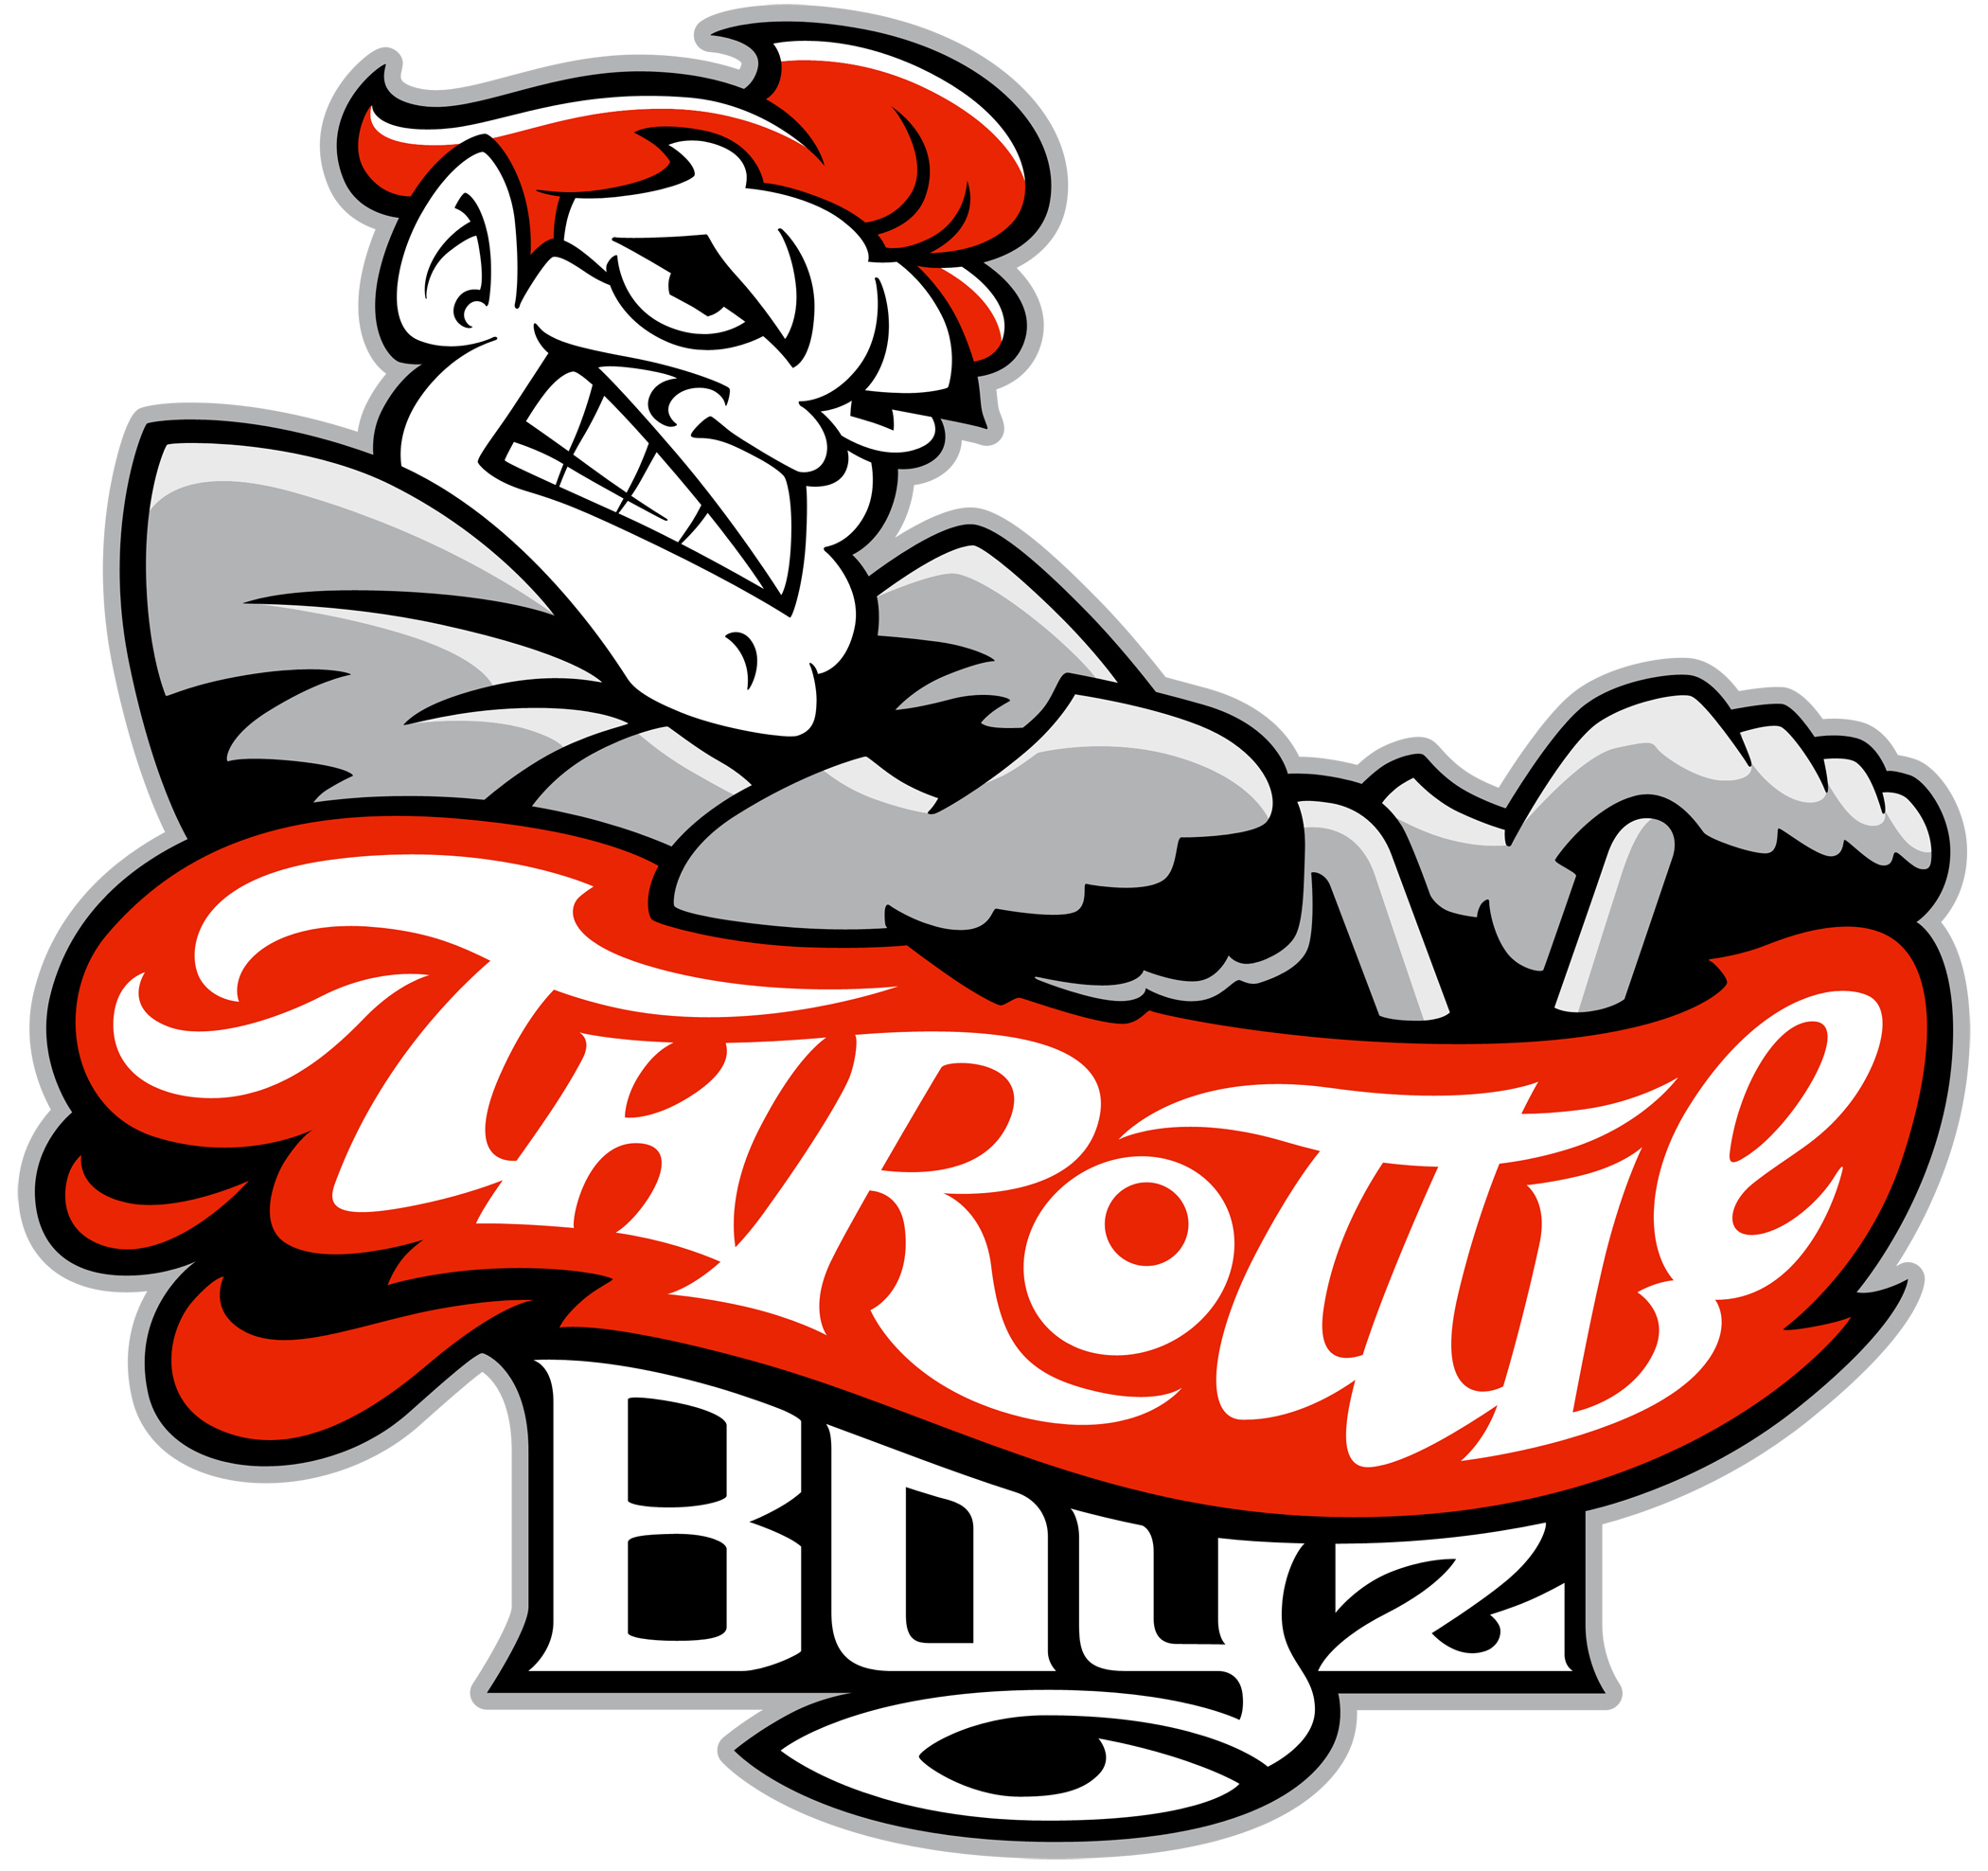 THROTTLE_BOYZ logo design by logo designer Cosmic Rays Design for your inspiration and for the worlds largest logo competition